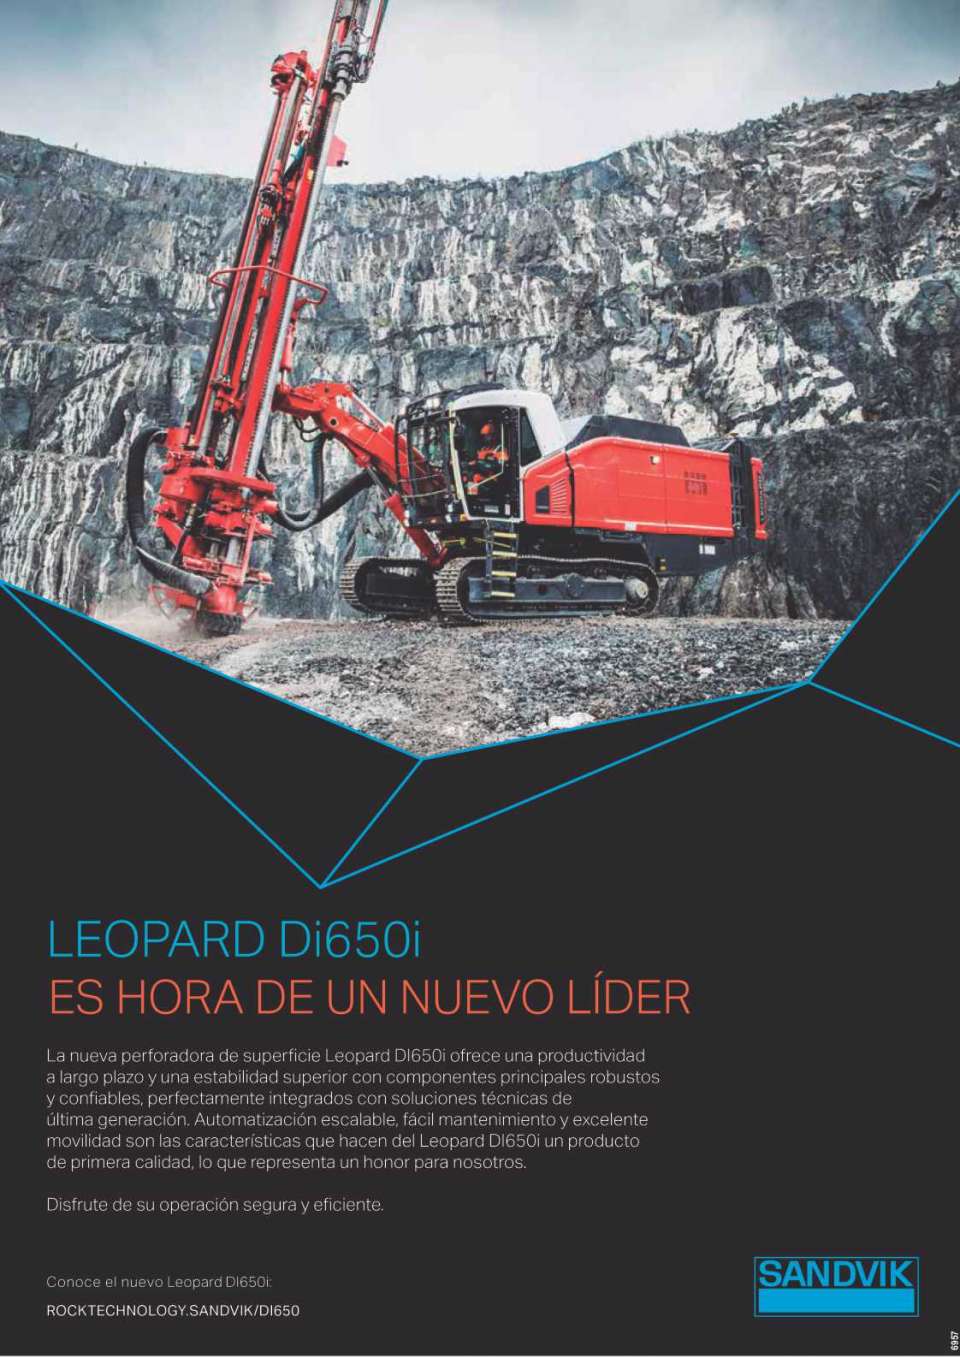 The new Leopard Dl650i surface drilling machine offers long-term productivity and superior stability with robust reliable main components perfectly integrated with state-of-the-art technical solutions